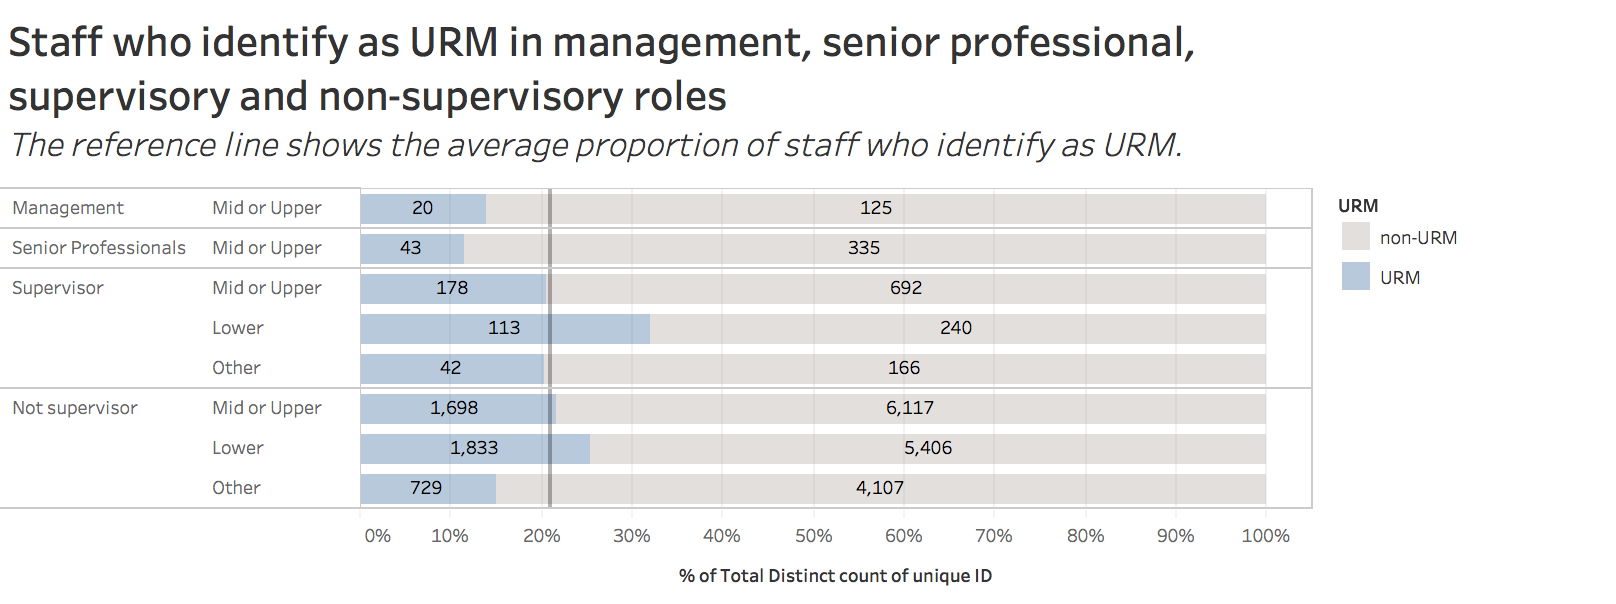 staff who identify as URM in management, senior professional, supervisory, and non-supervisory roles